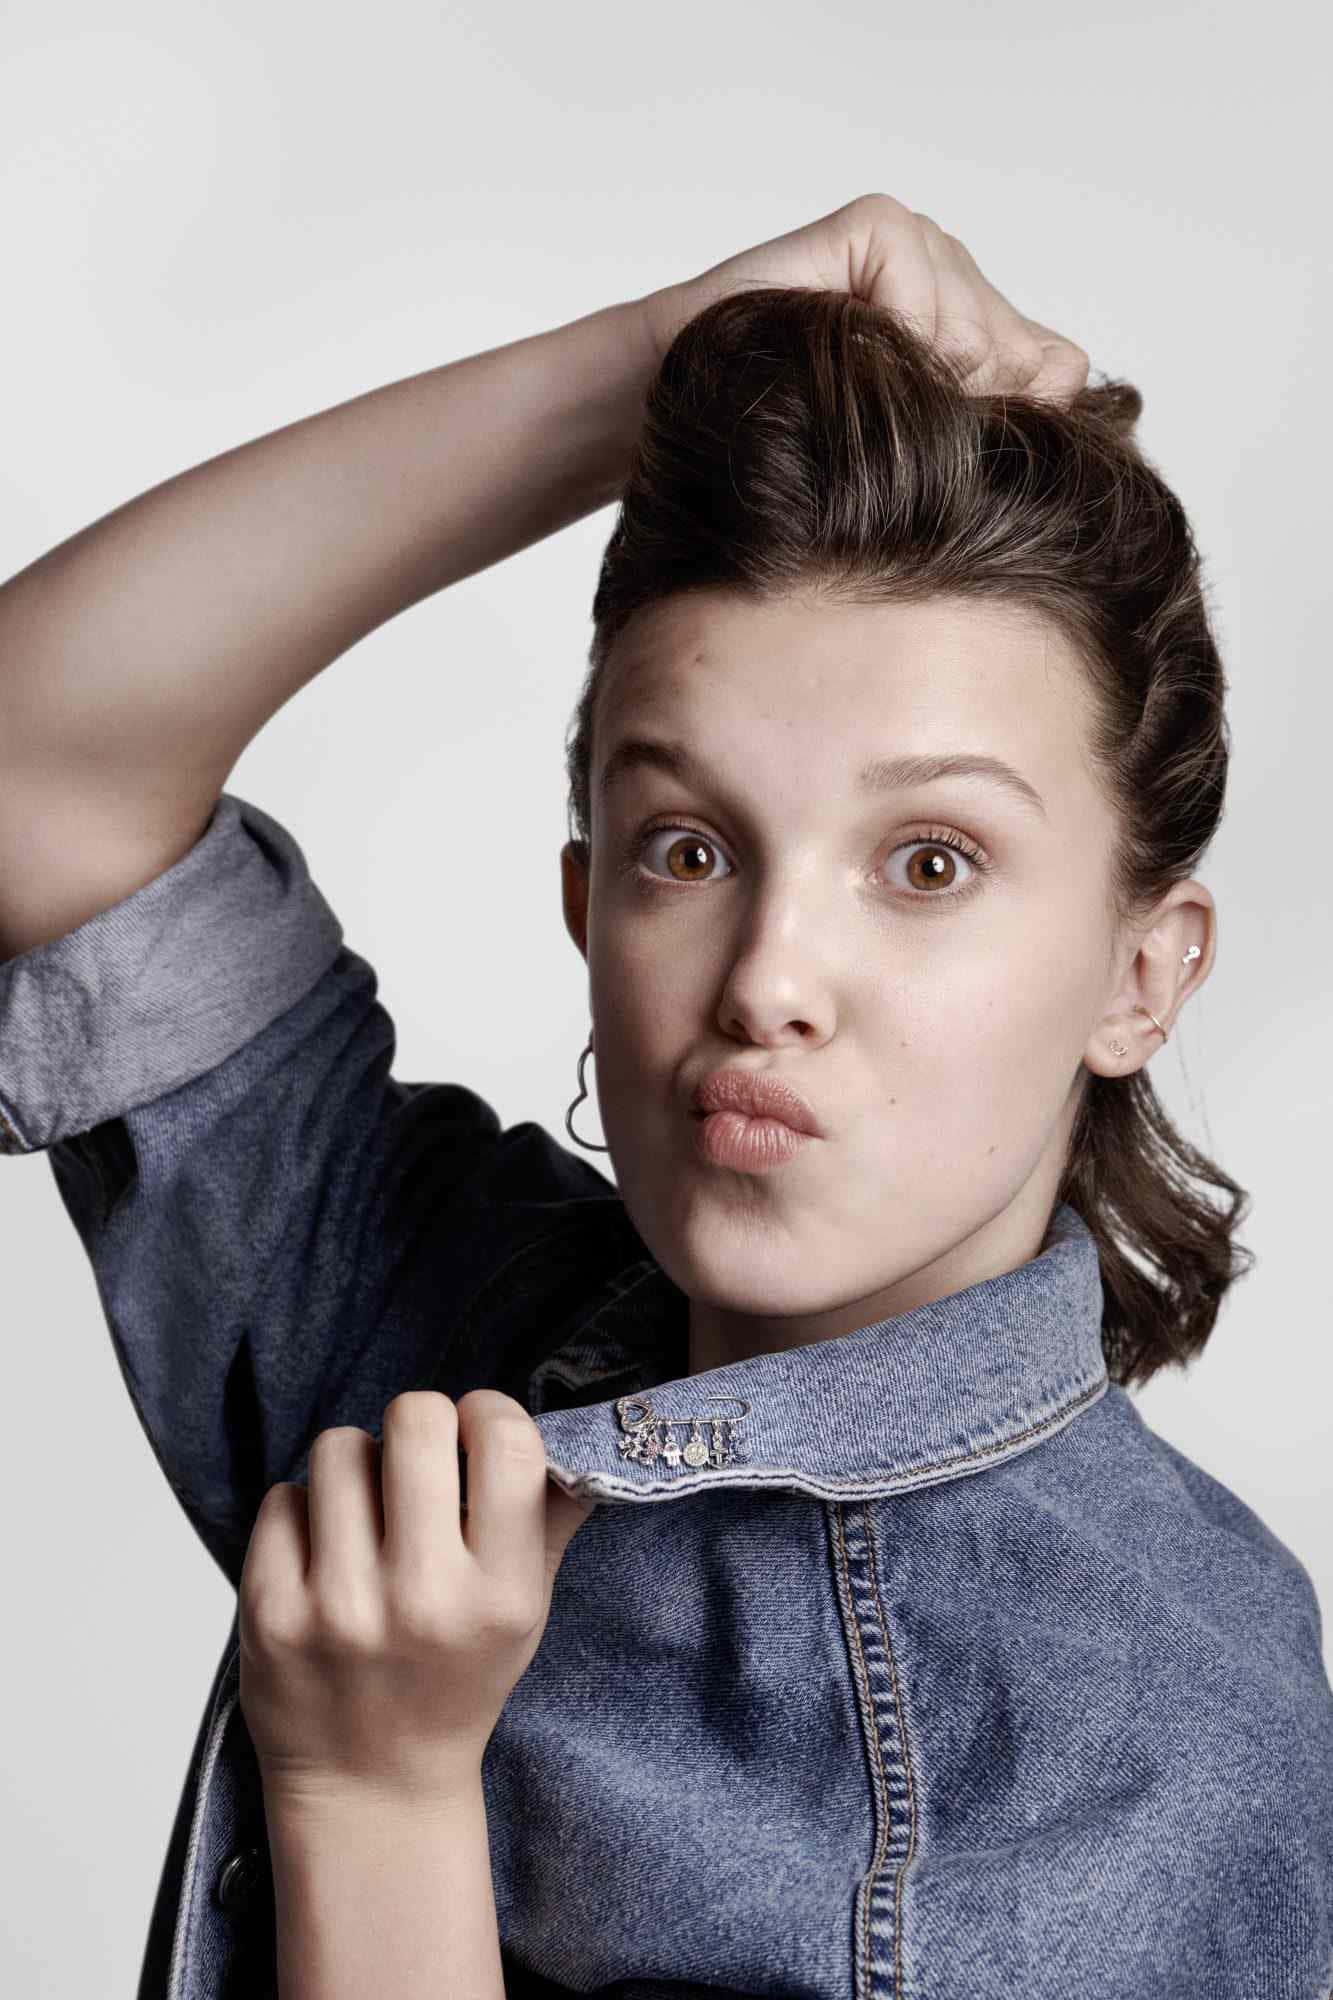 Millie Bobby Brown is an Emmy Award-winning actress best known for her role as Eleven in Stranger Things.